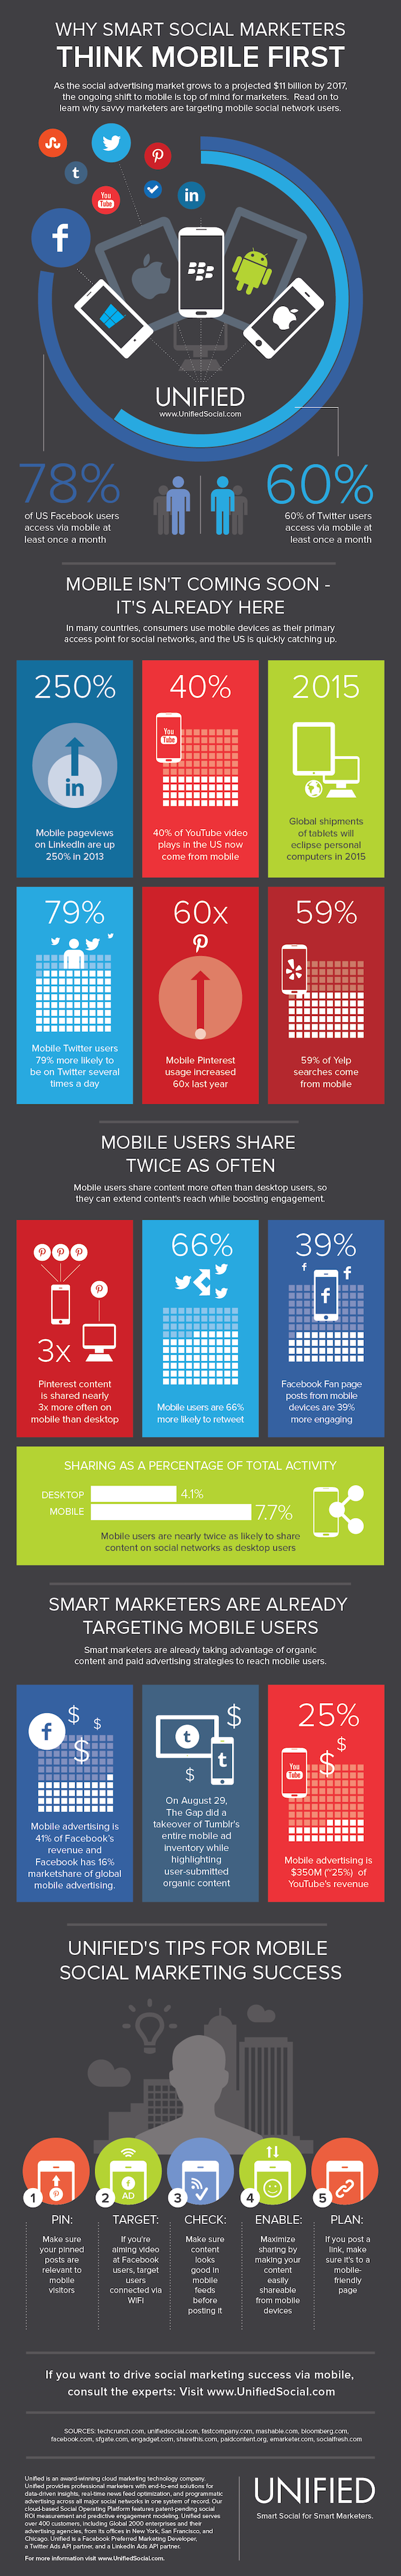 mobile-marketing-infographic